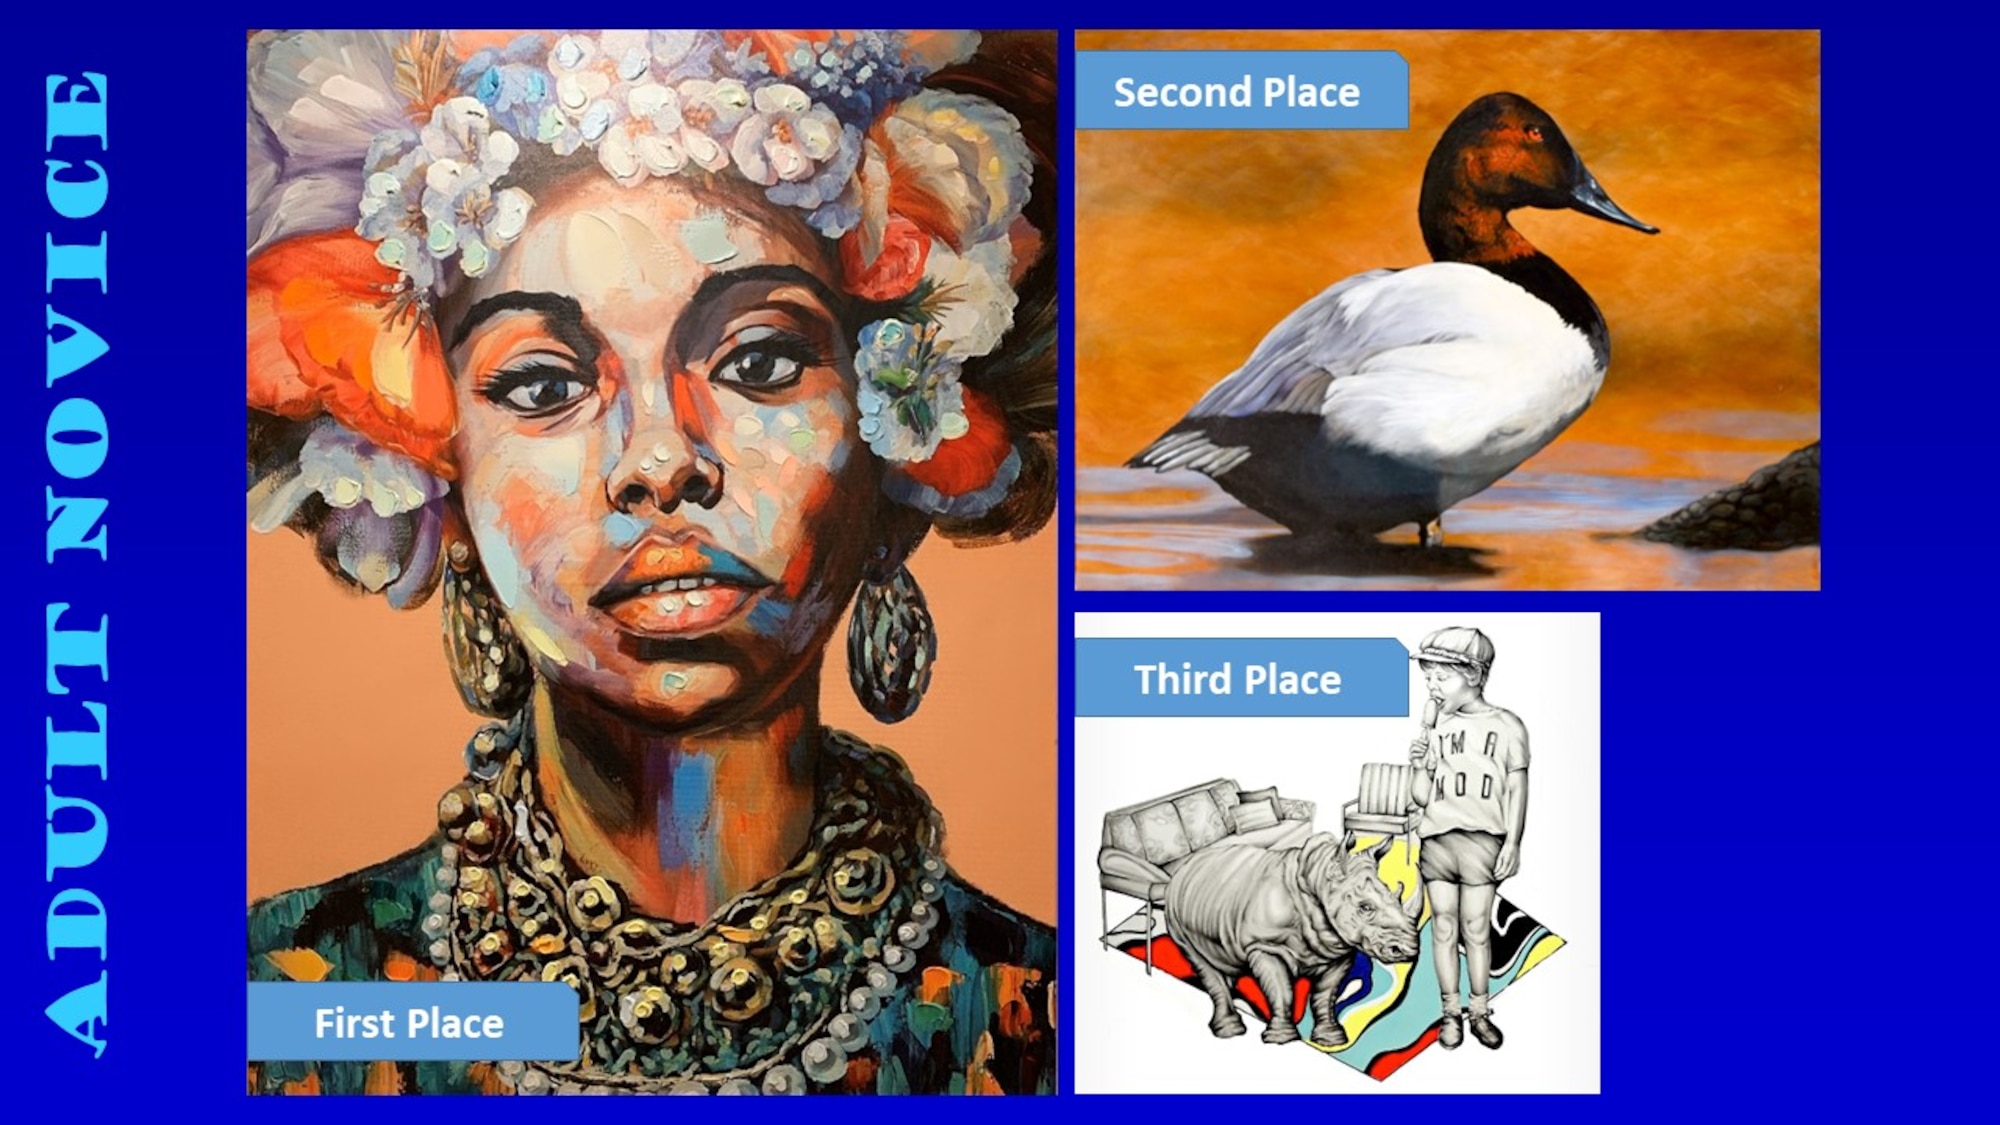 Photos of the top three winners of the Air Force Art Contest adult novice category.